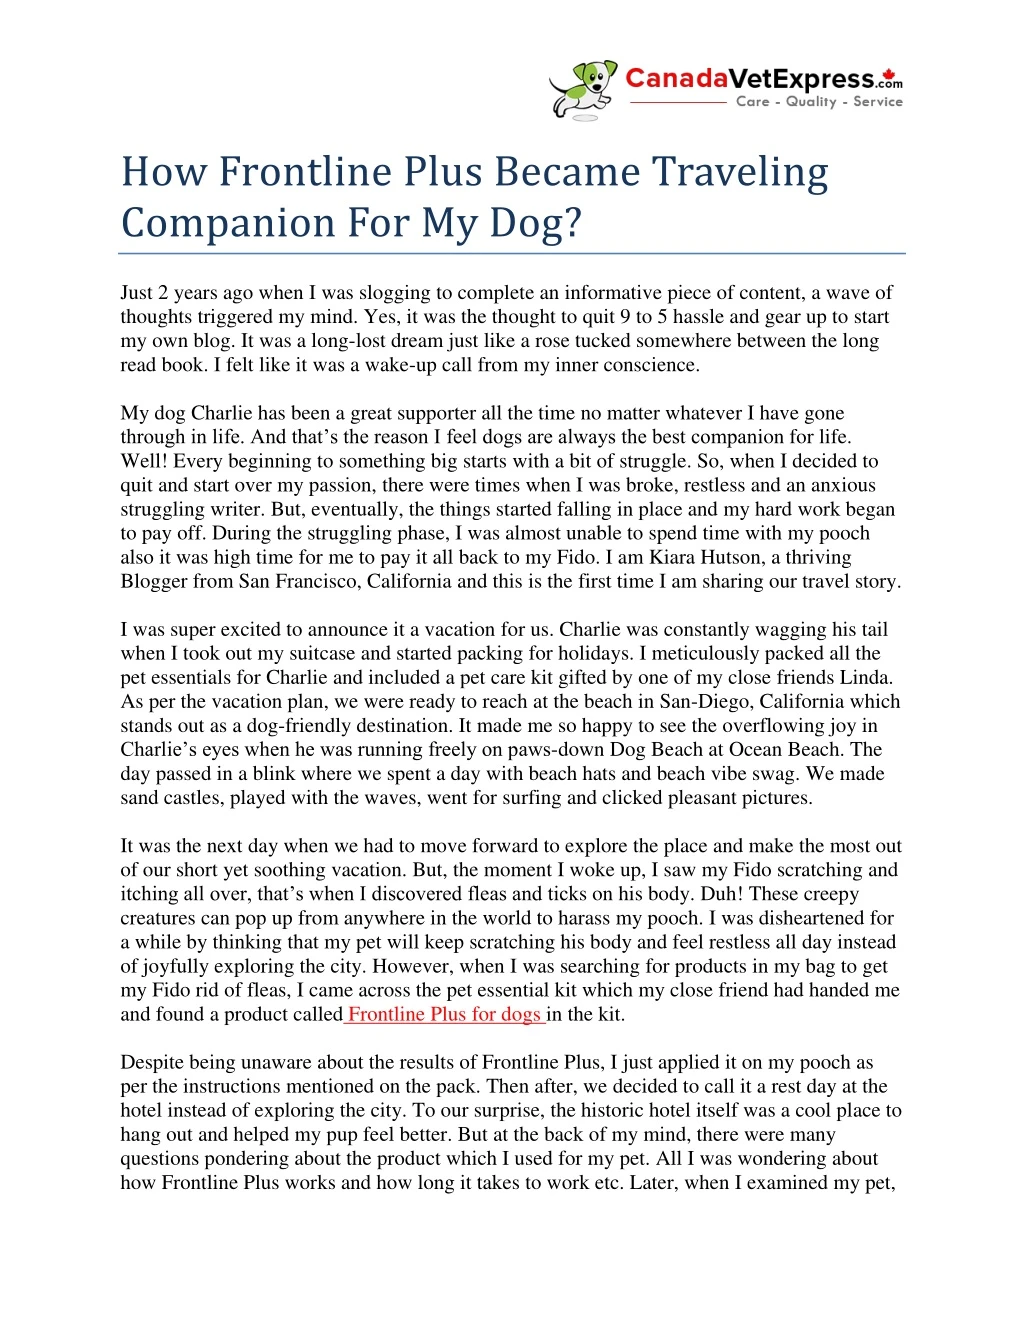 how frontline plus became traveling companion